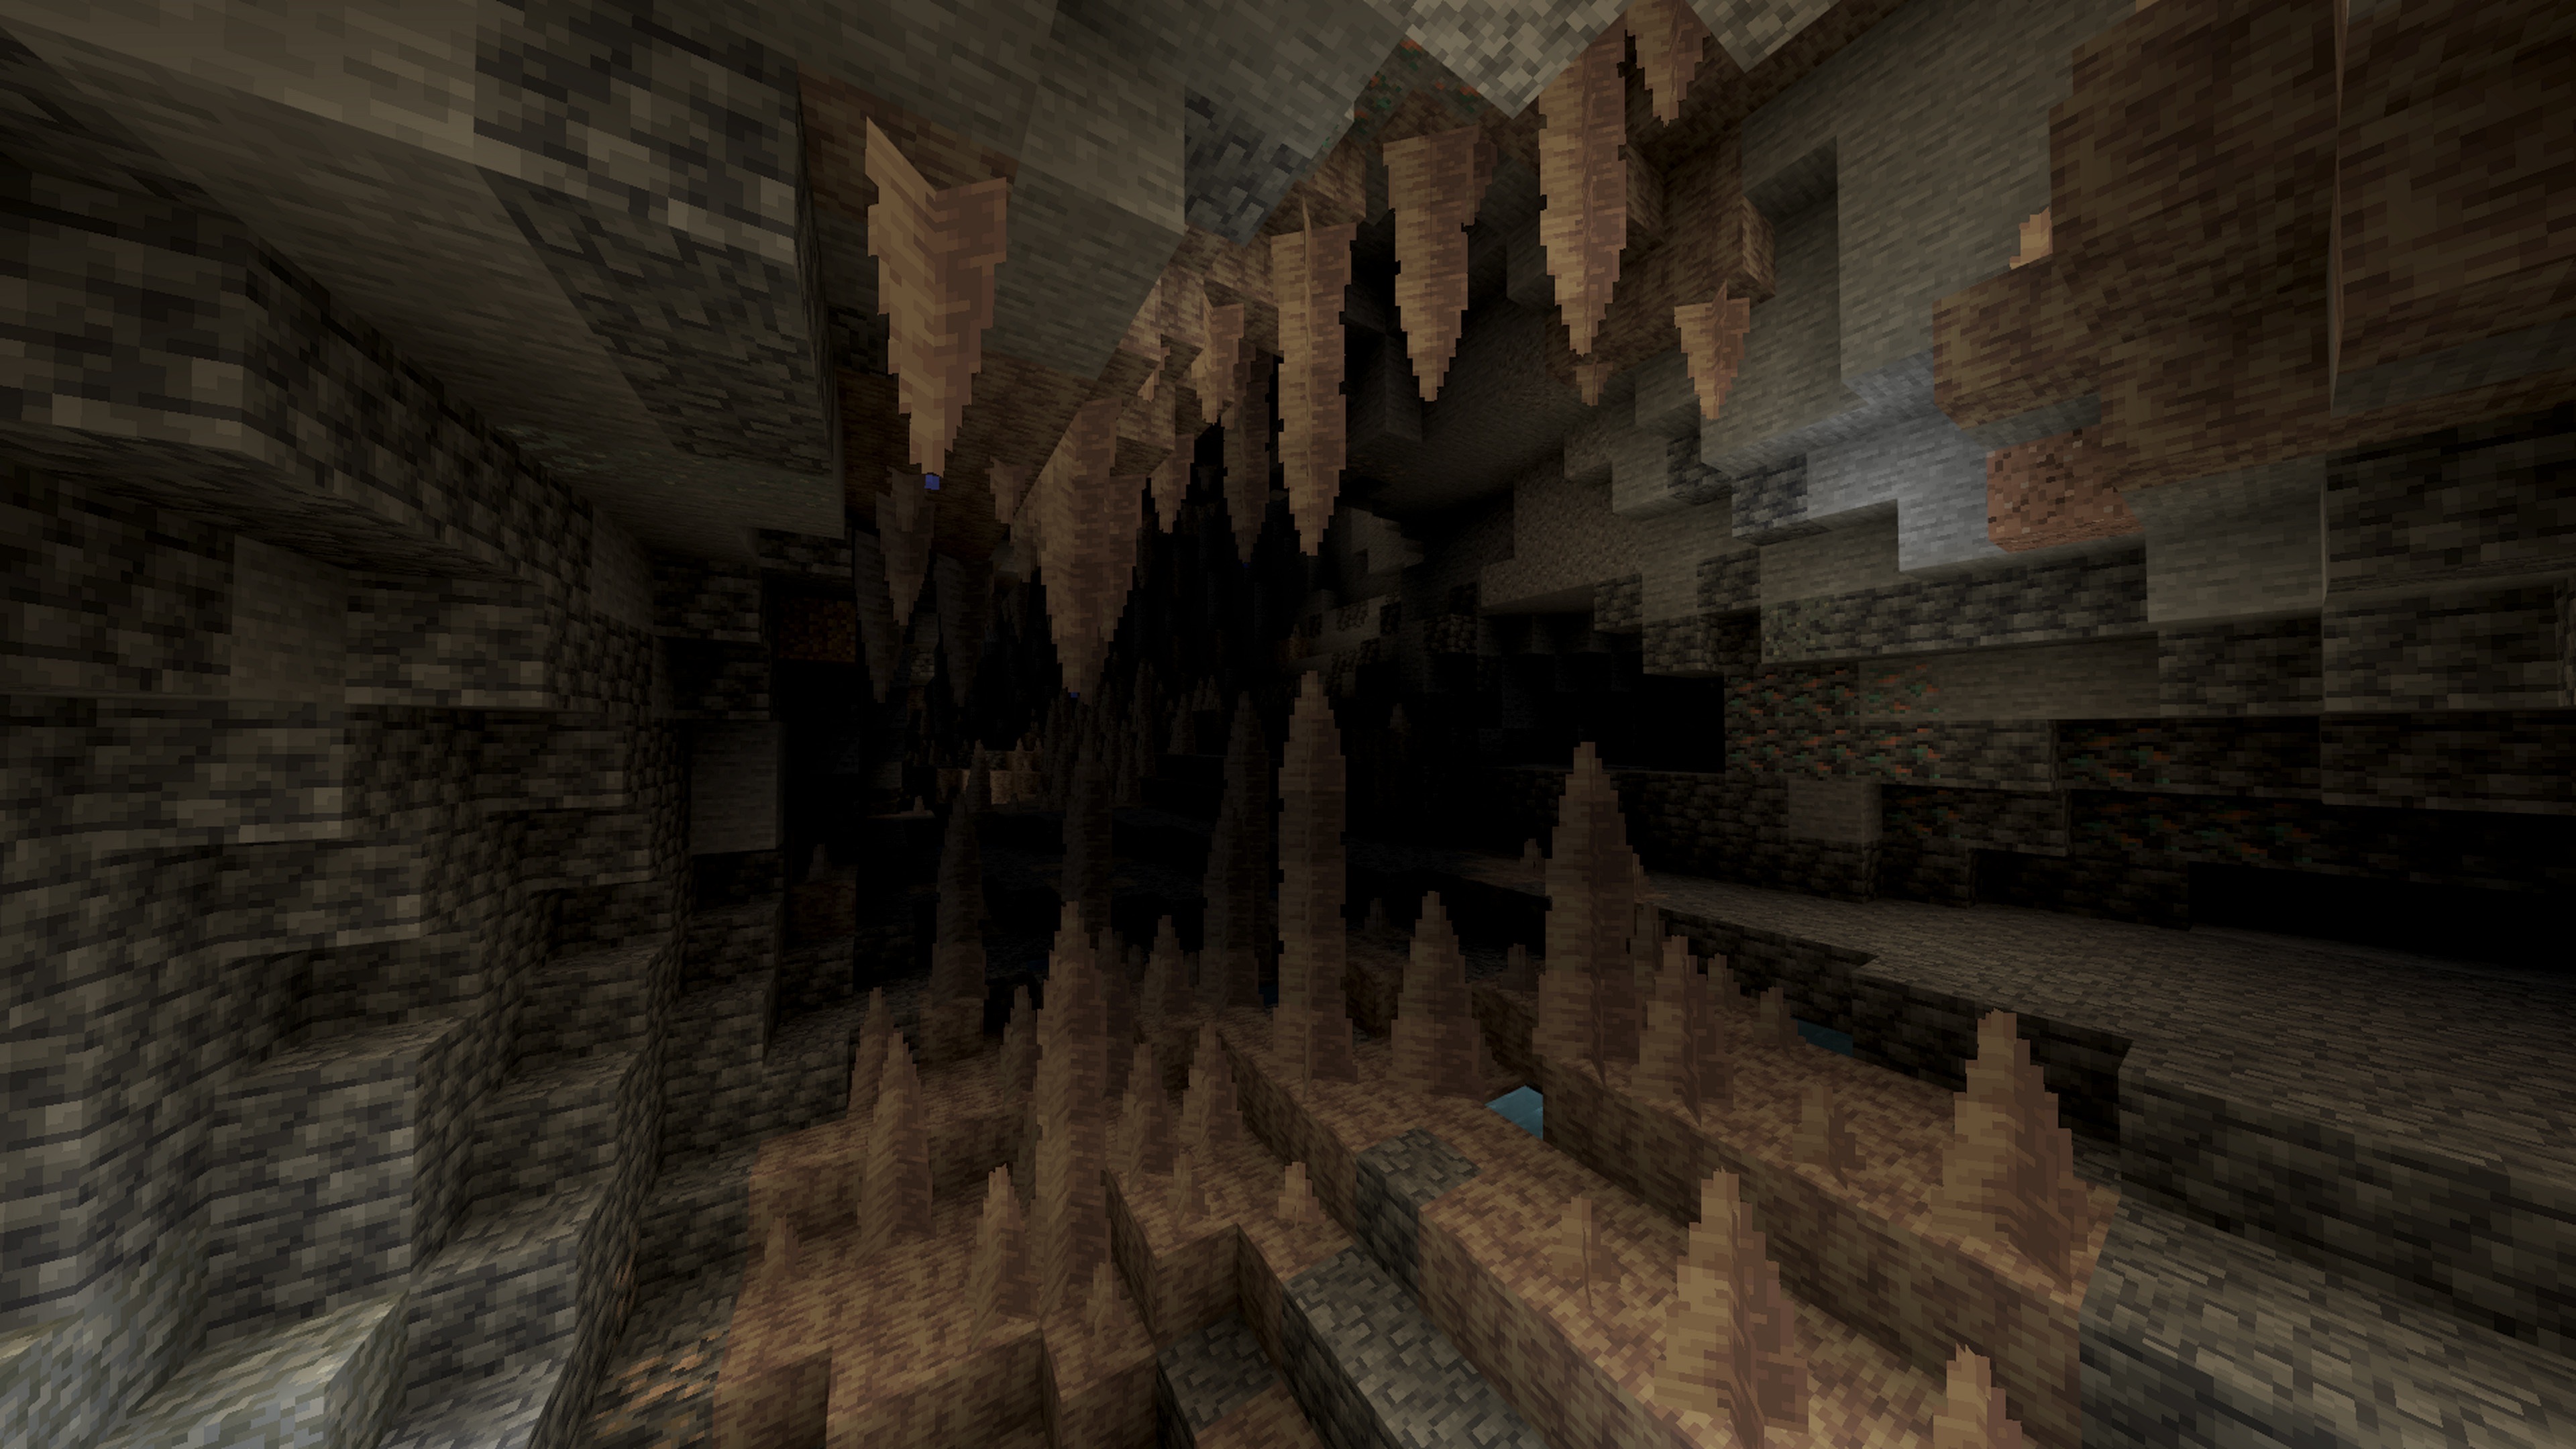 A Minecraft dripstone cave with stalactites and stalagmites.